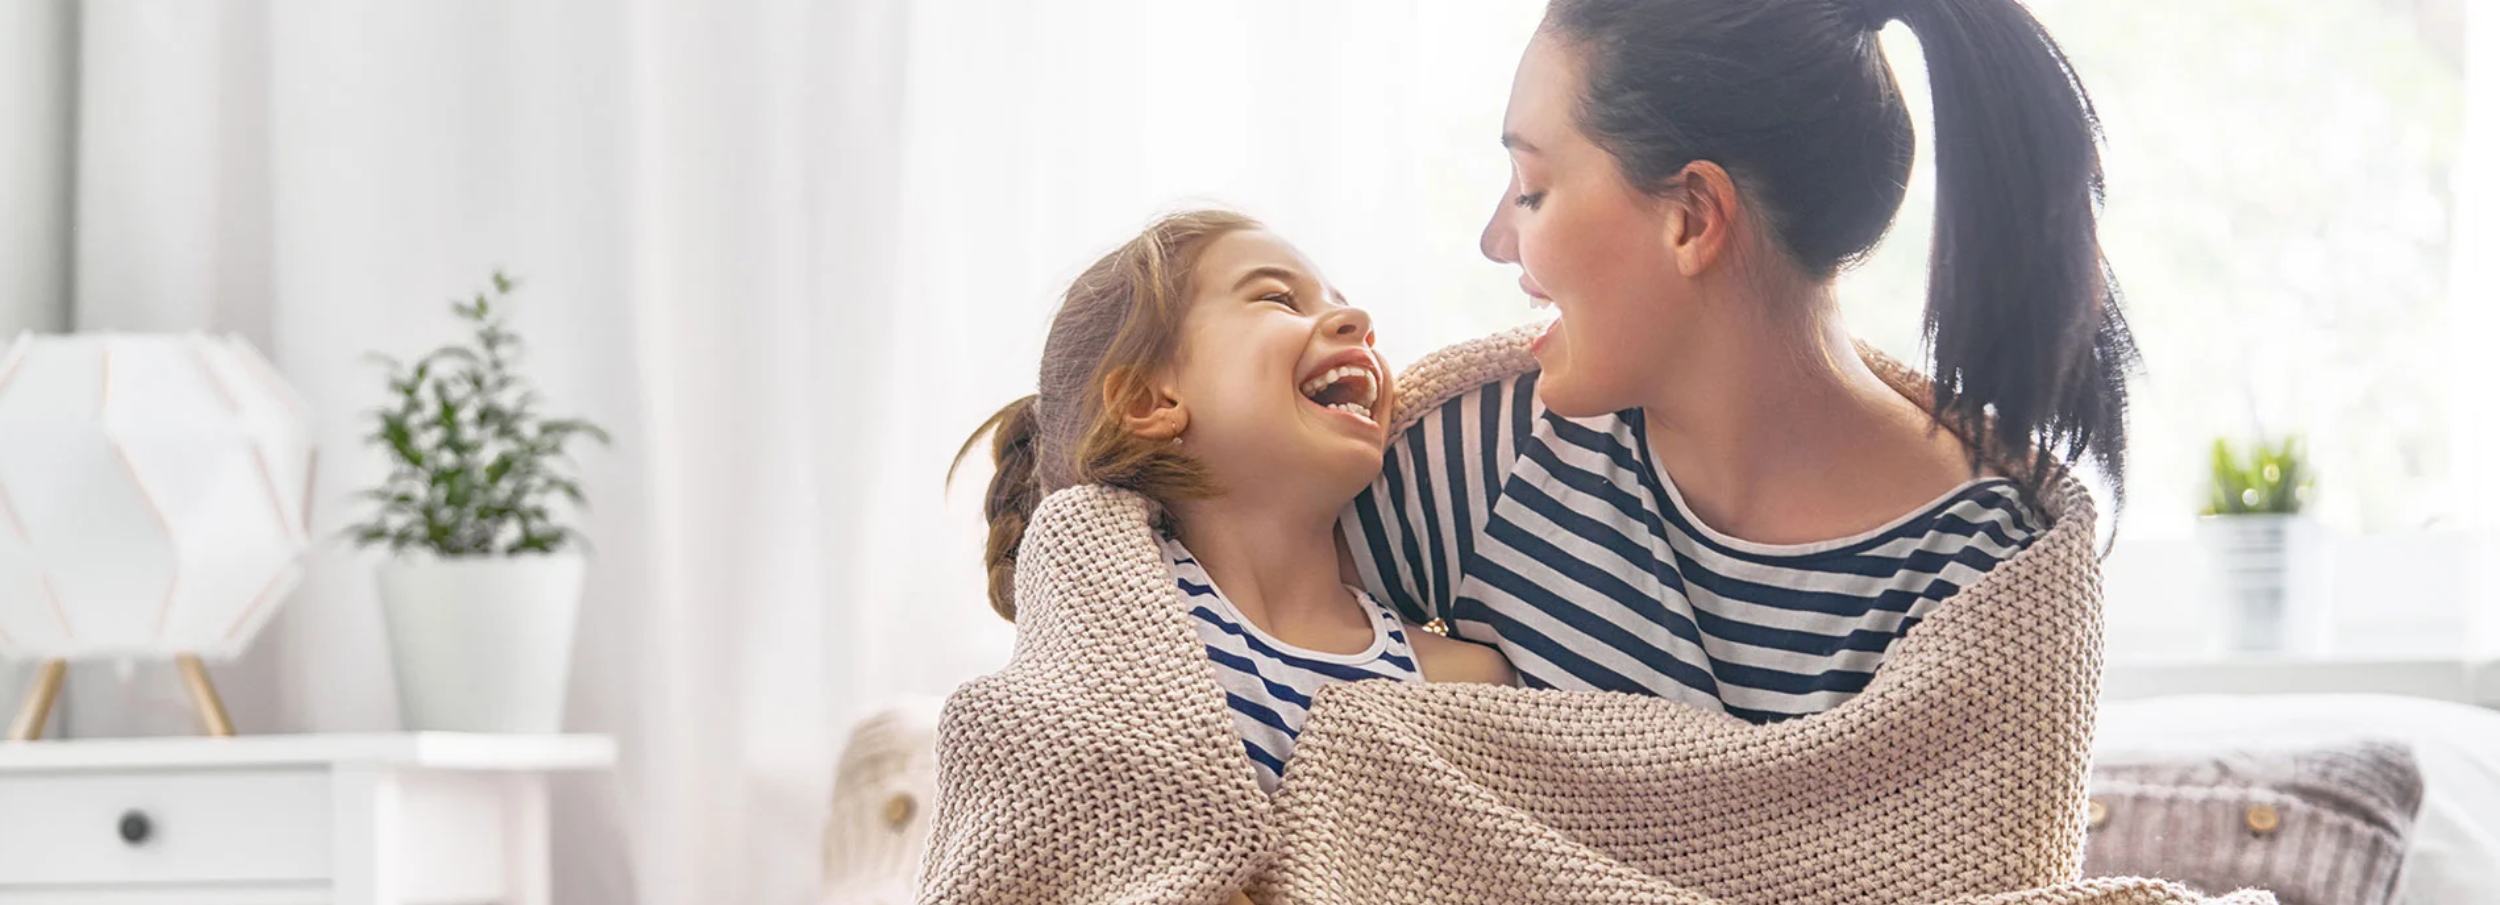 Mother and daughter  wrapped in taupe woven blanket smiling and laughing in brightly lit interior.